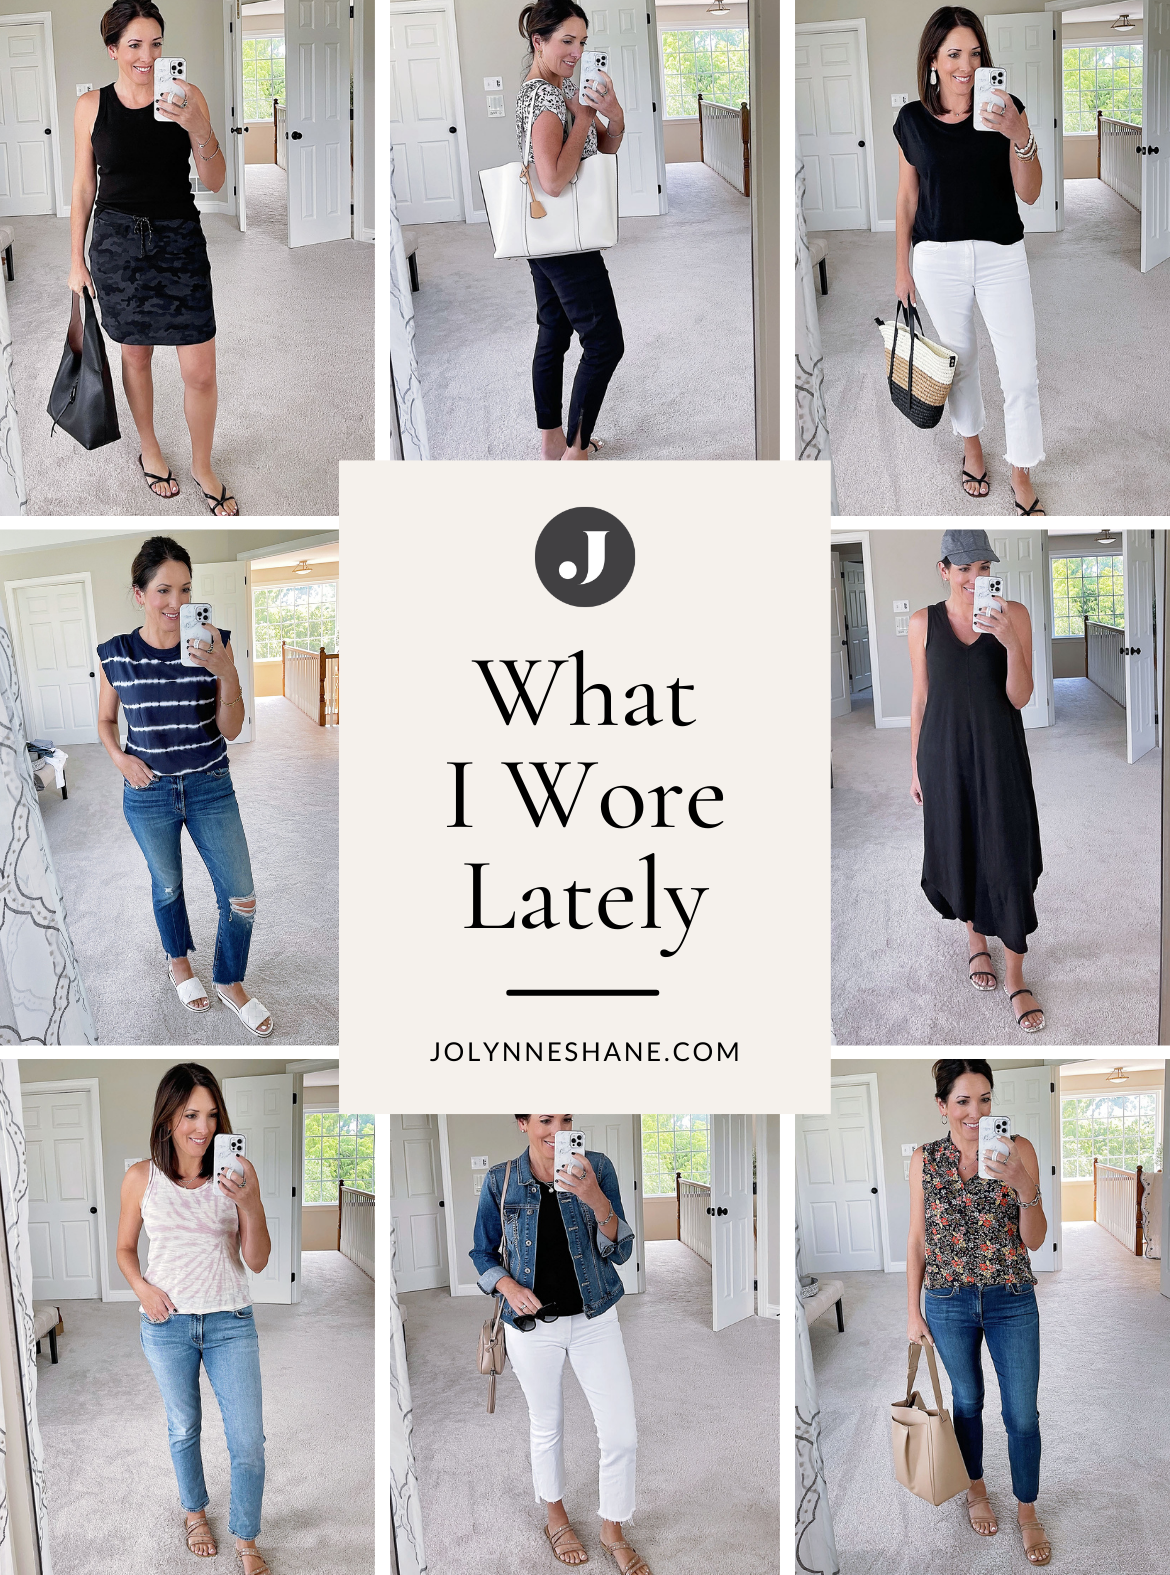 WHAT I WORE LATELY: Everyday outfit ideas for women over 40